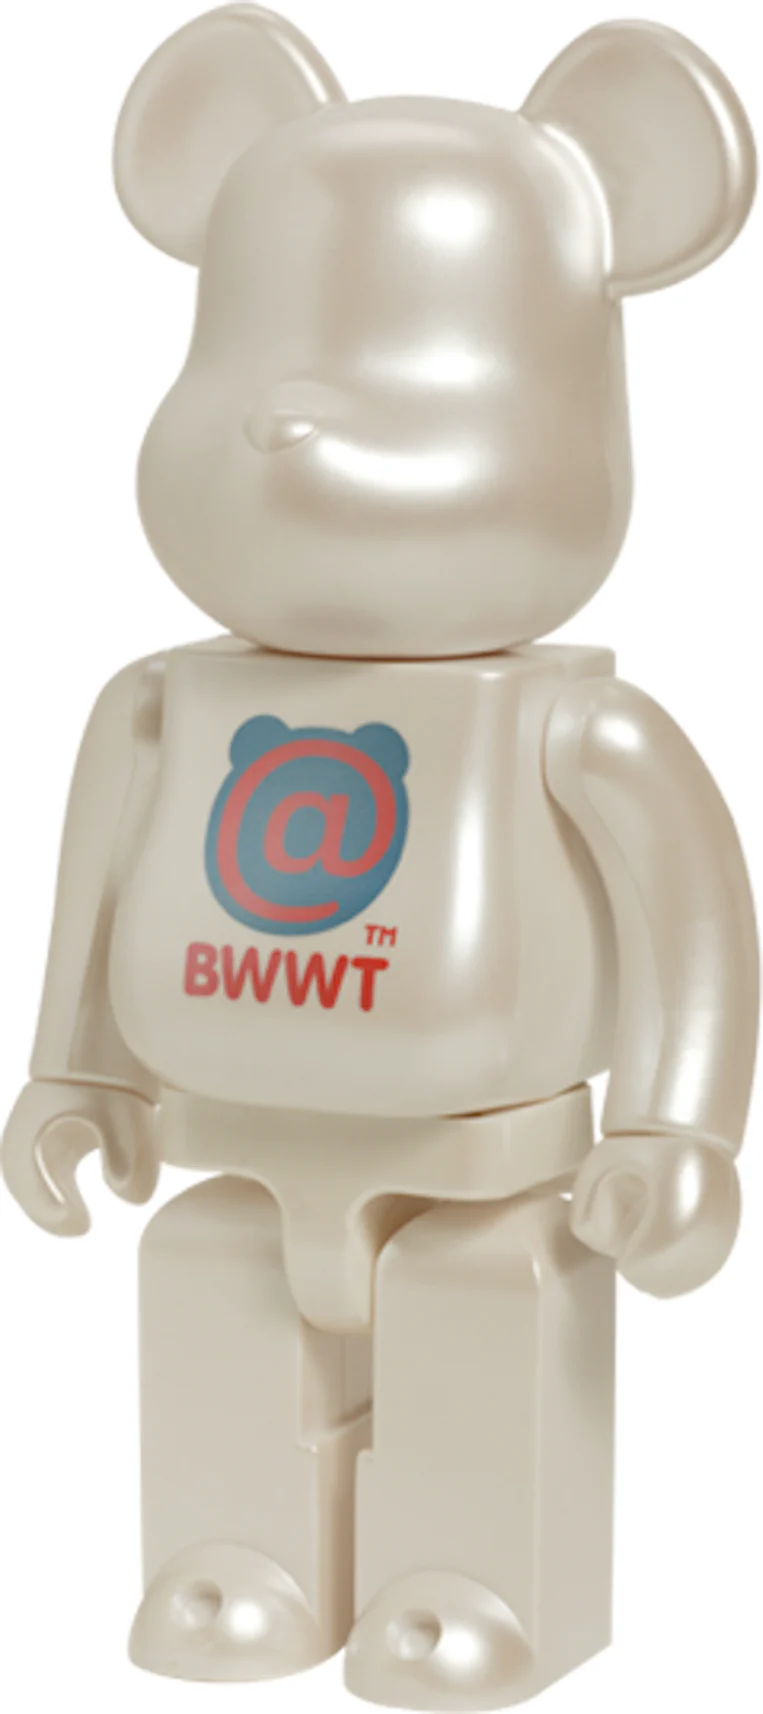 WORLD WIDE TOUR BE@RBRICK hf (C) 1000％ - その他